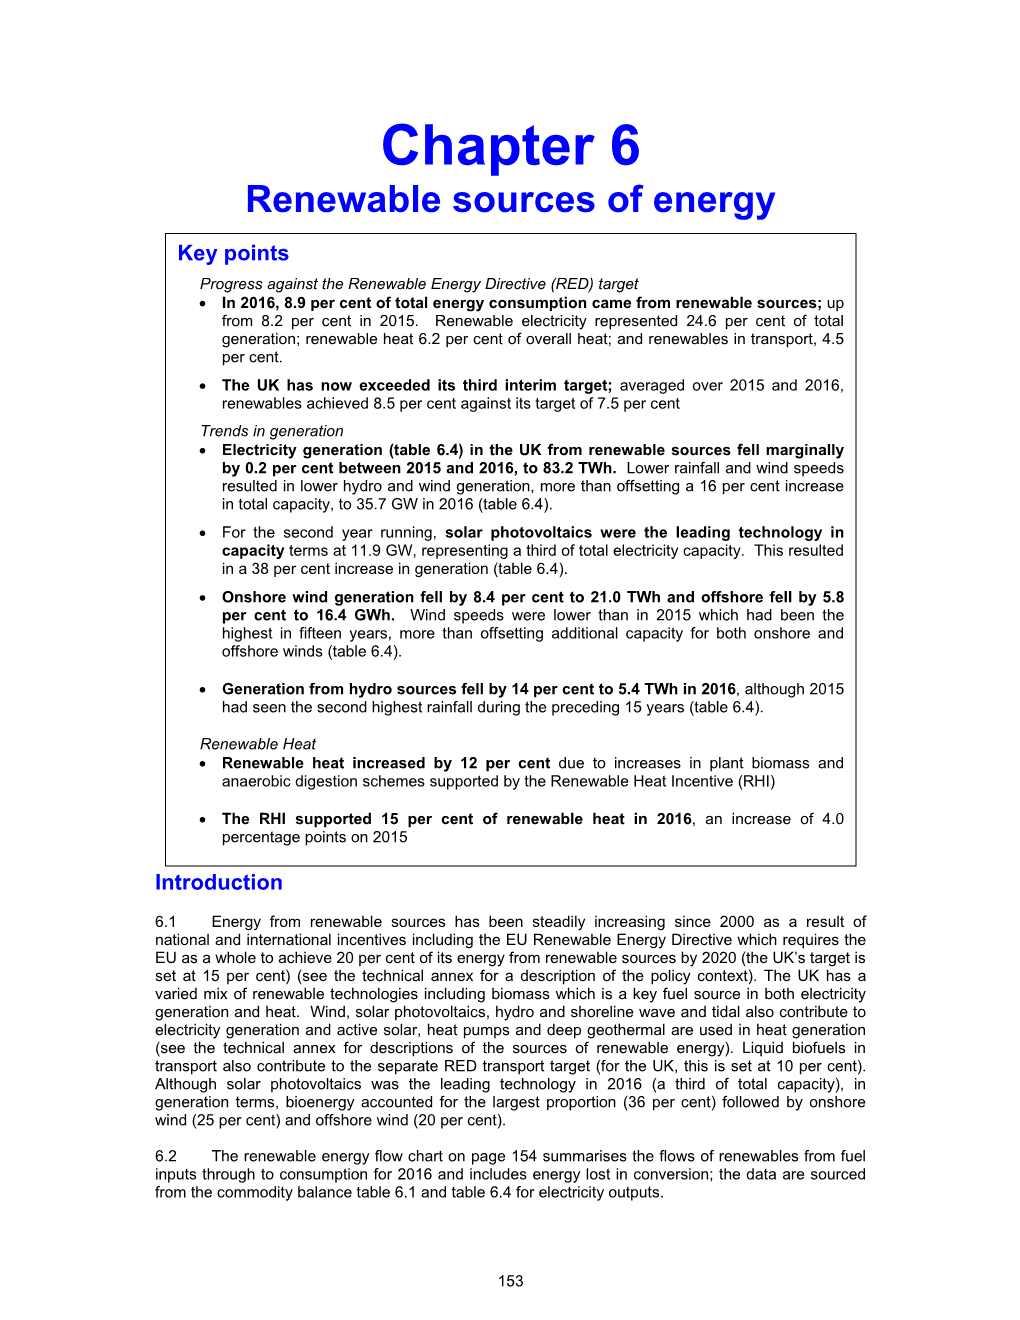 (DUKES), Chapter 6: Renewable Sources of Energy